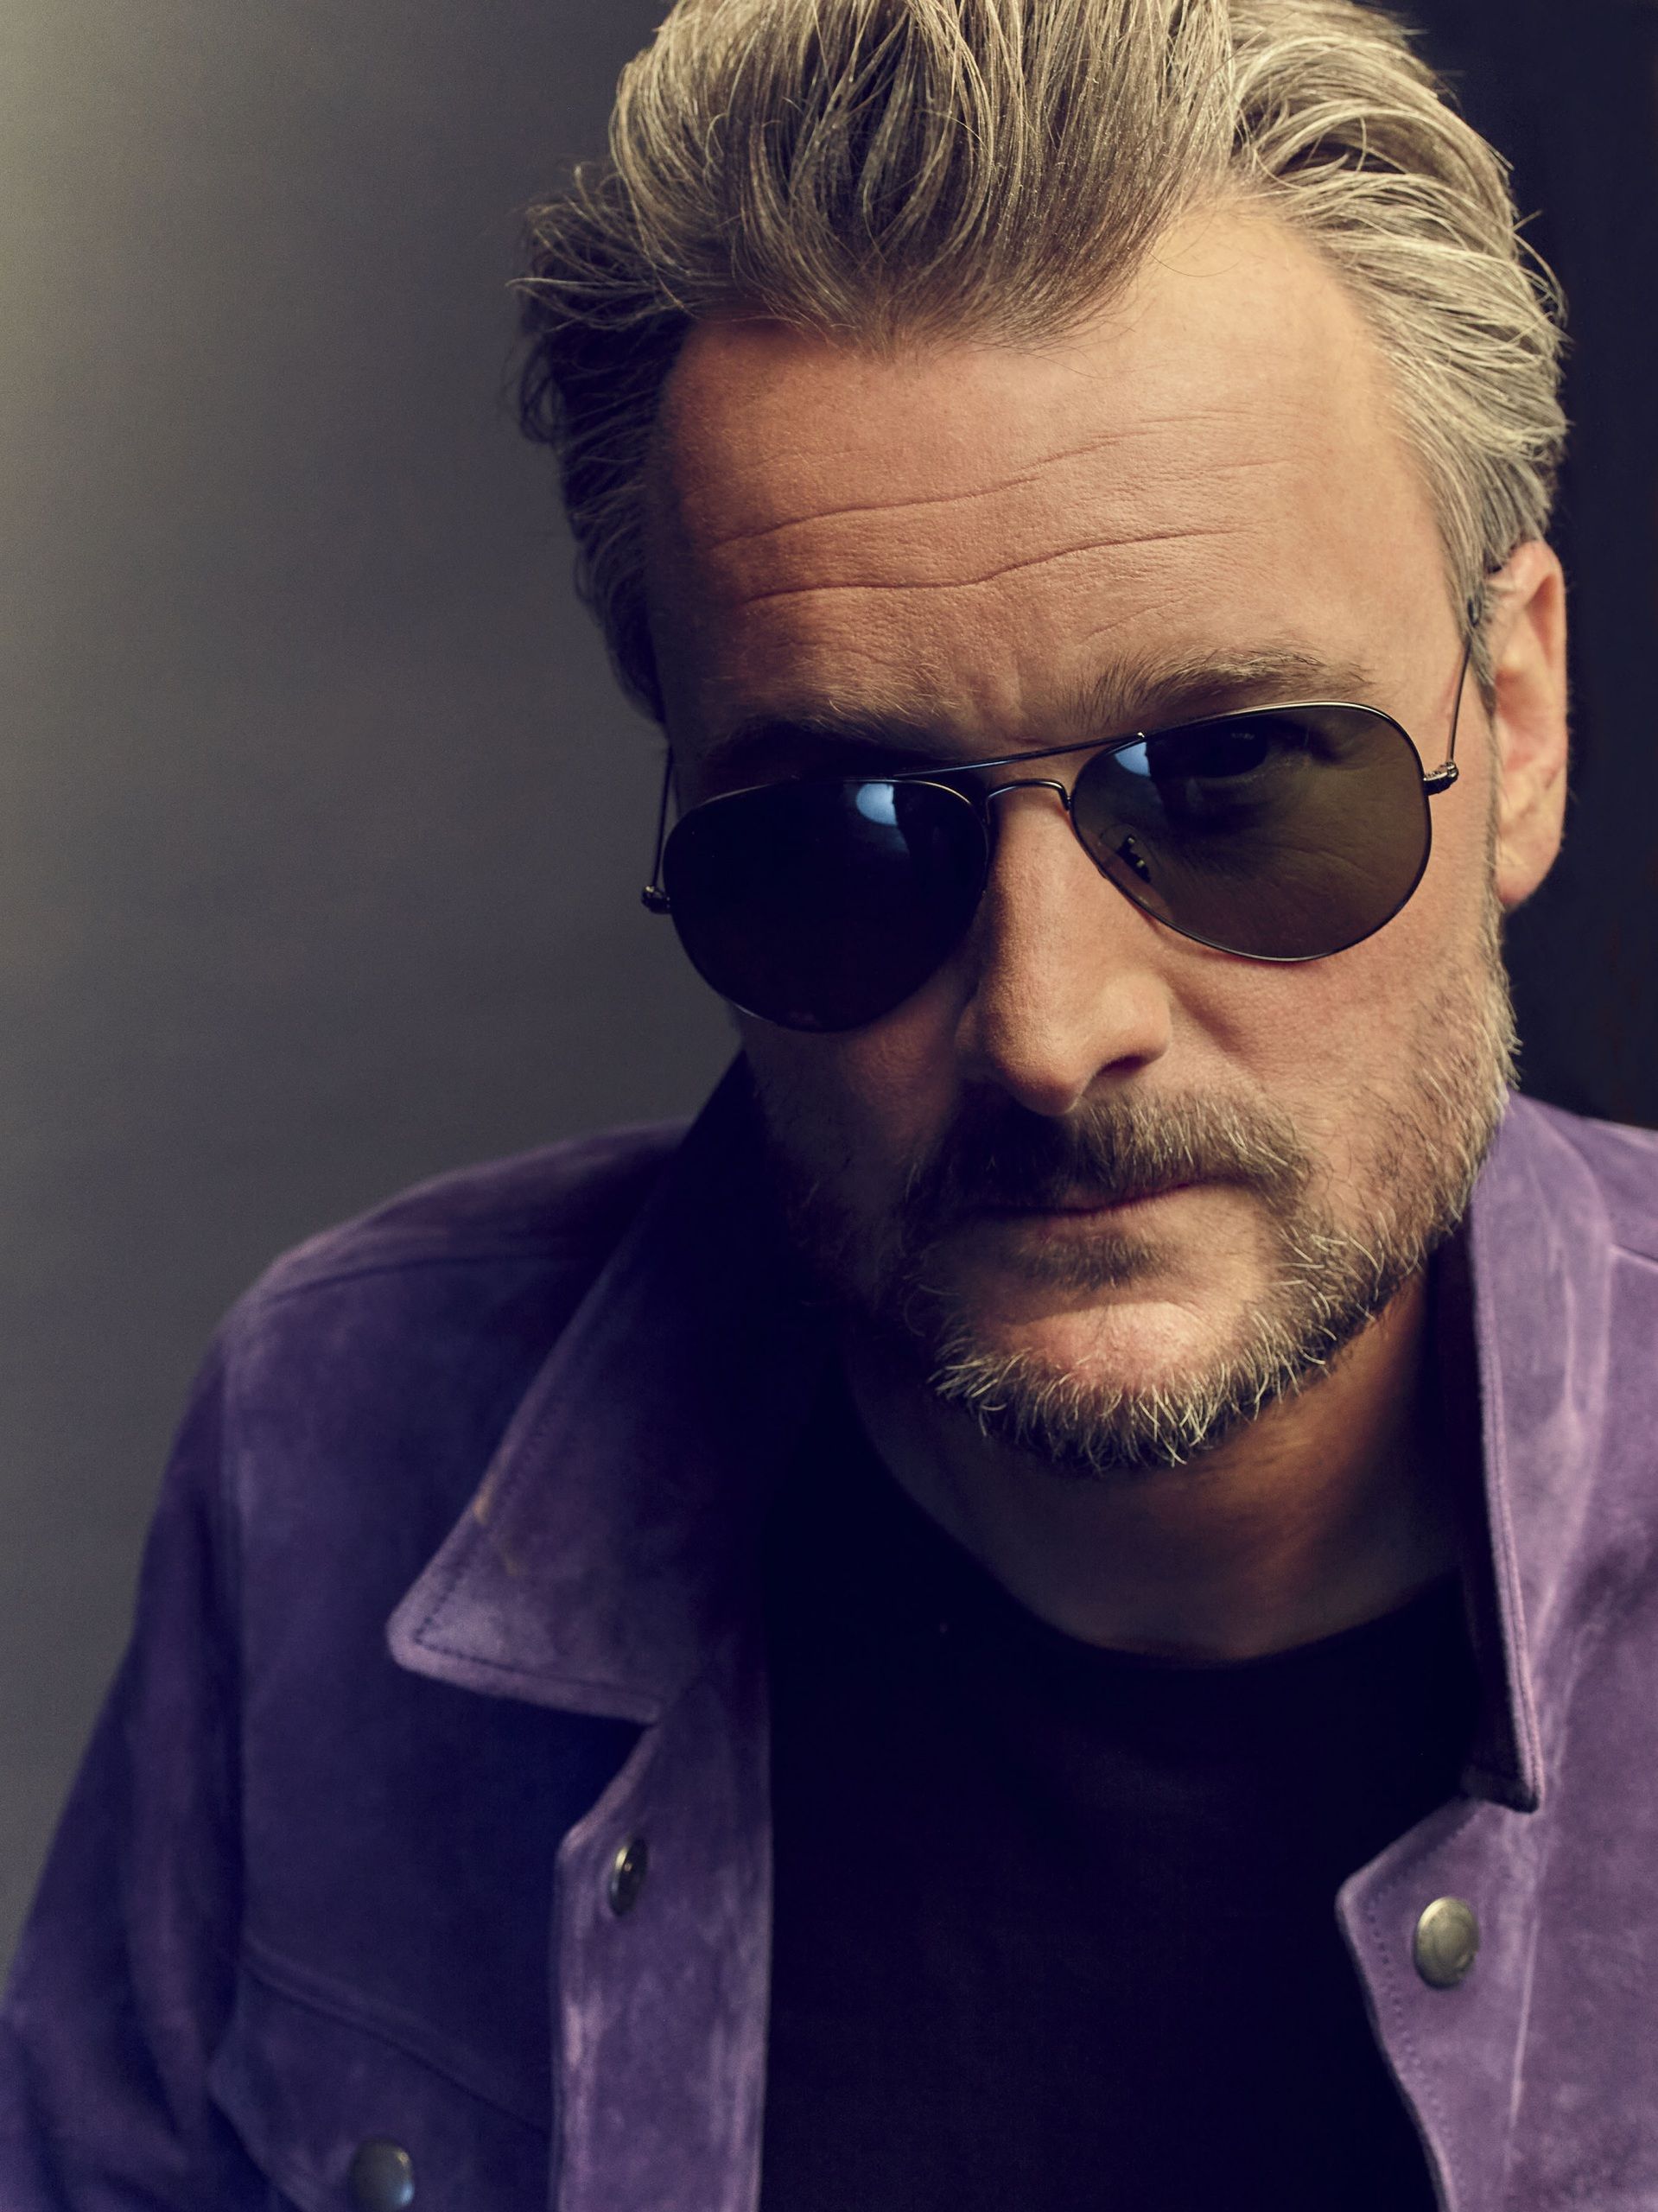 Eric Church Kicks Off First-Ever In-the-Round Tour, Inviting Fans to “Gather Again” This Friday